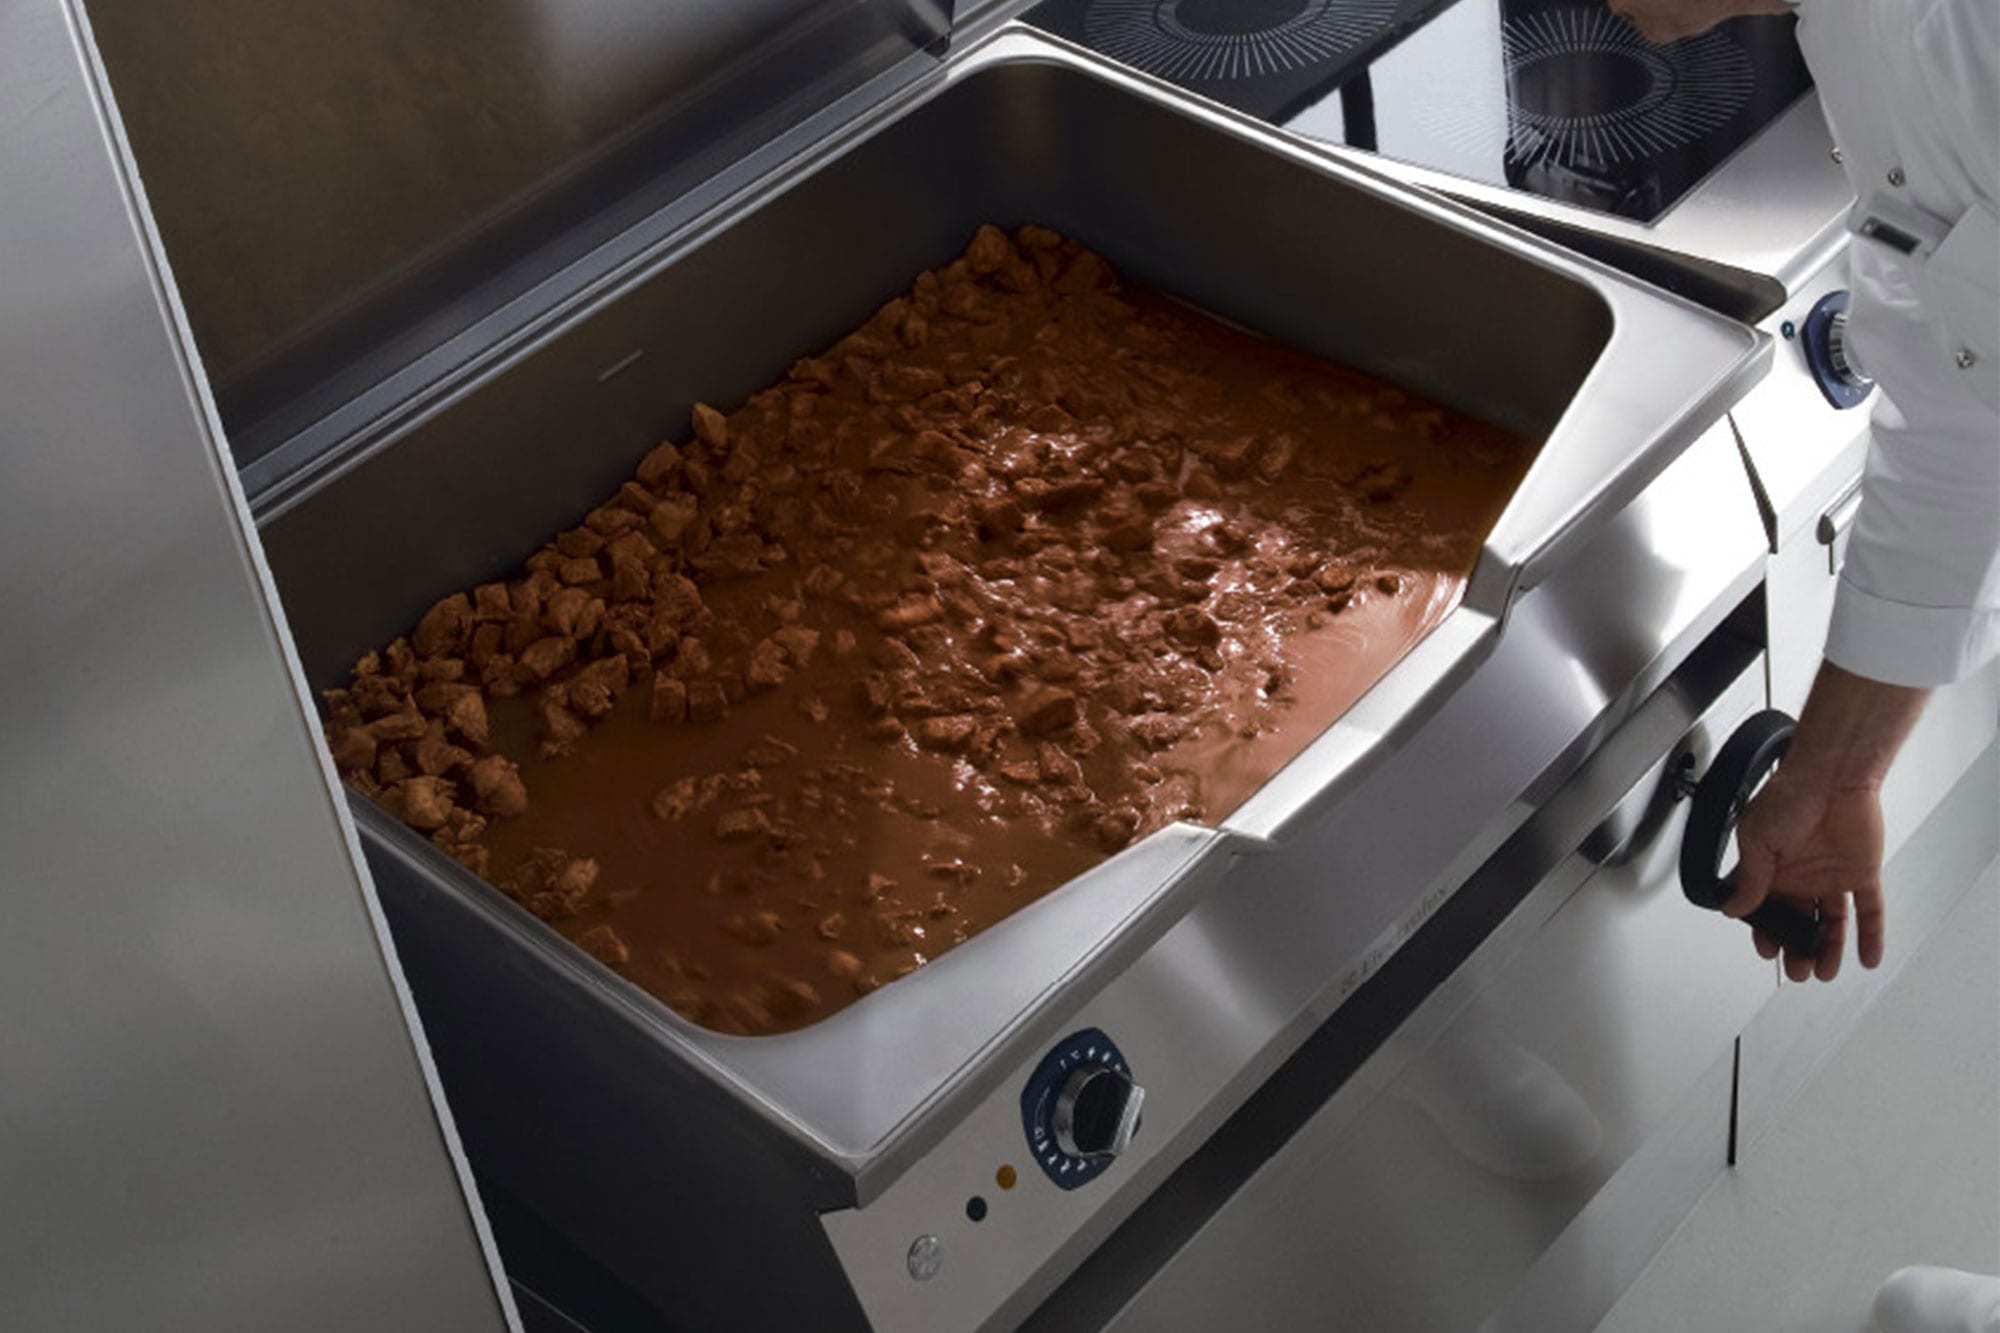 Boiling and Braising Pans - Electrolux Professional Global